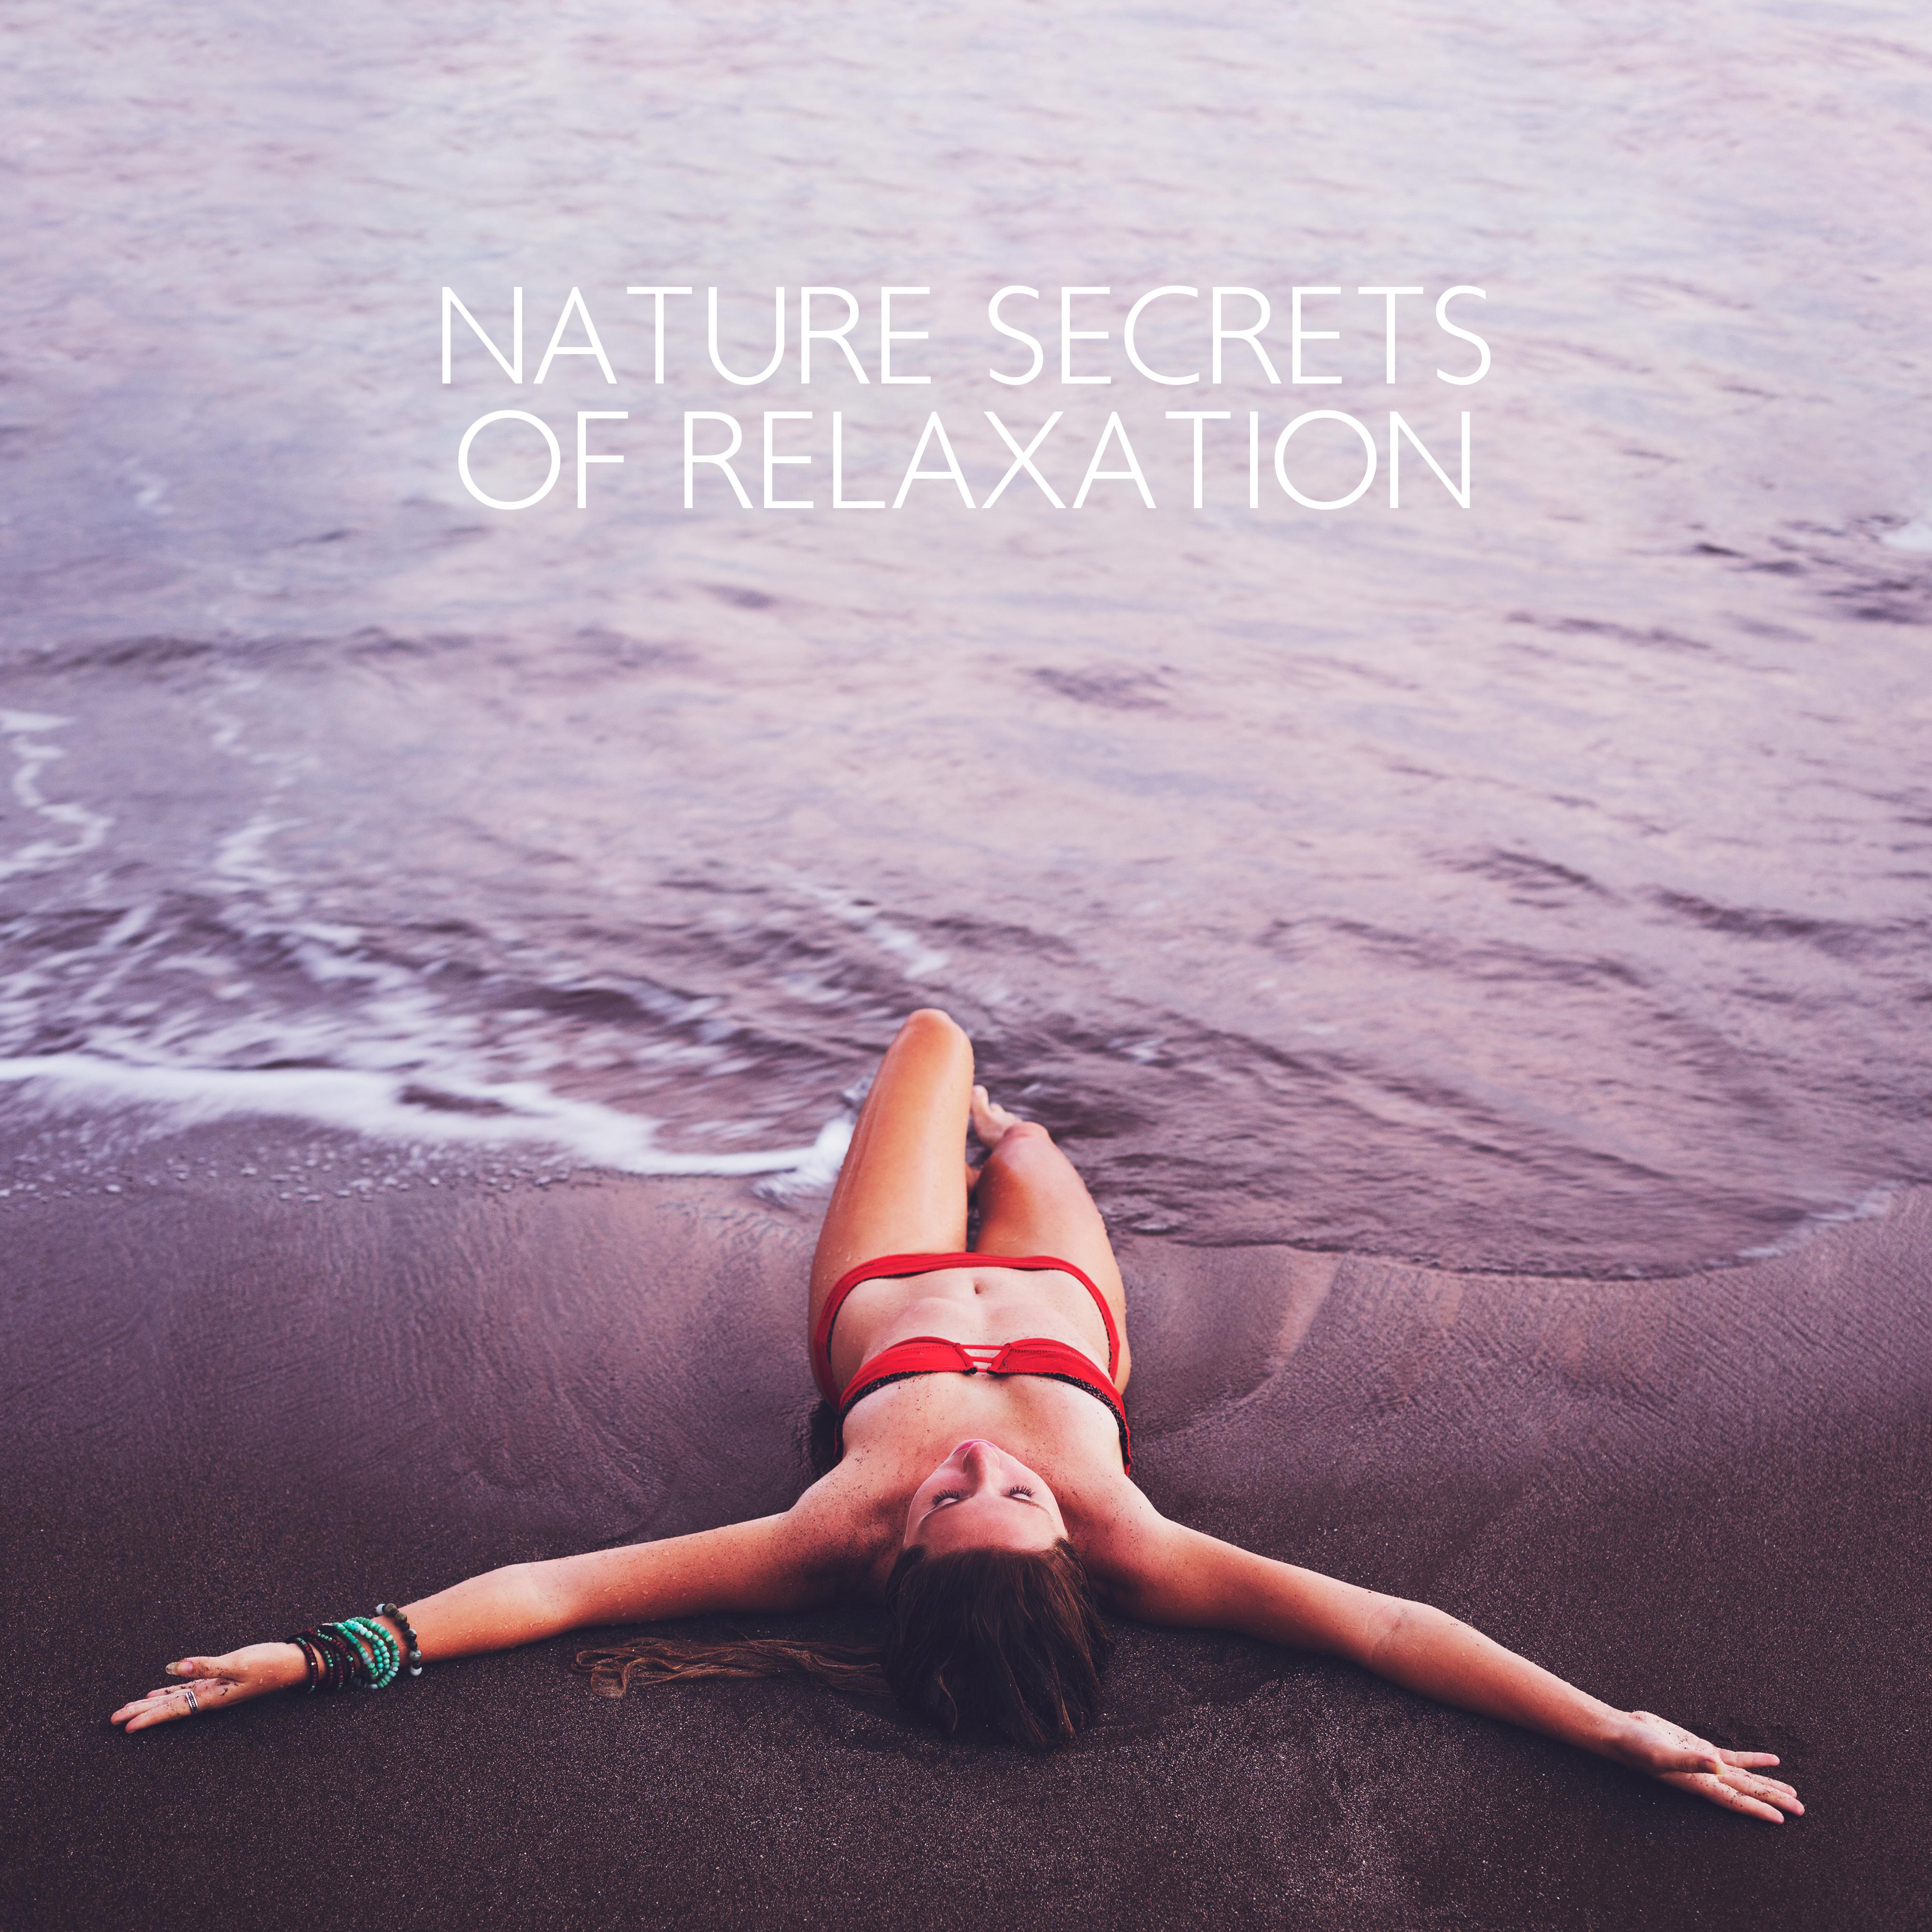 Nature Secrets of Relaxation: 2019 New Age Music with Soothing Nature Sounds for Total Relax, Calming Down, Vital Energy Increase, Body & Mind Regeneration